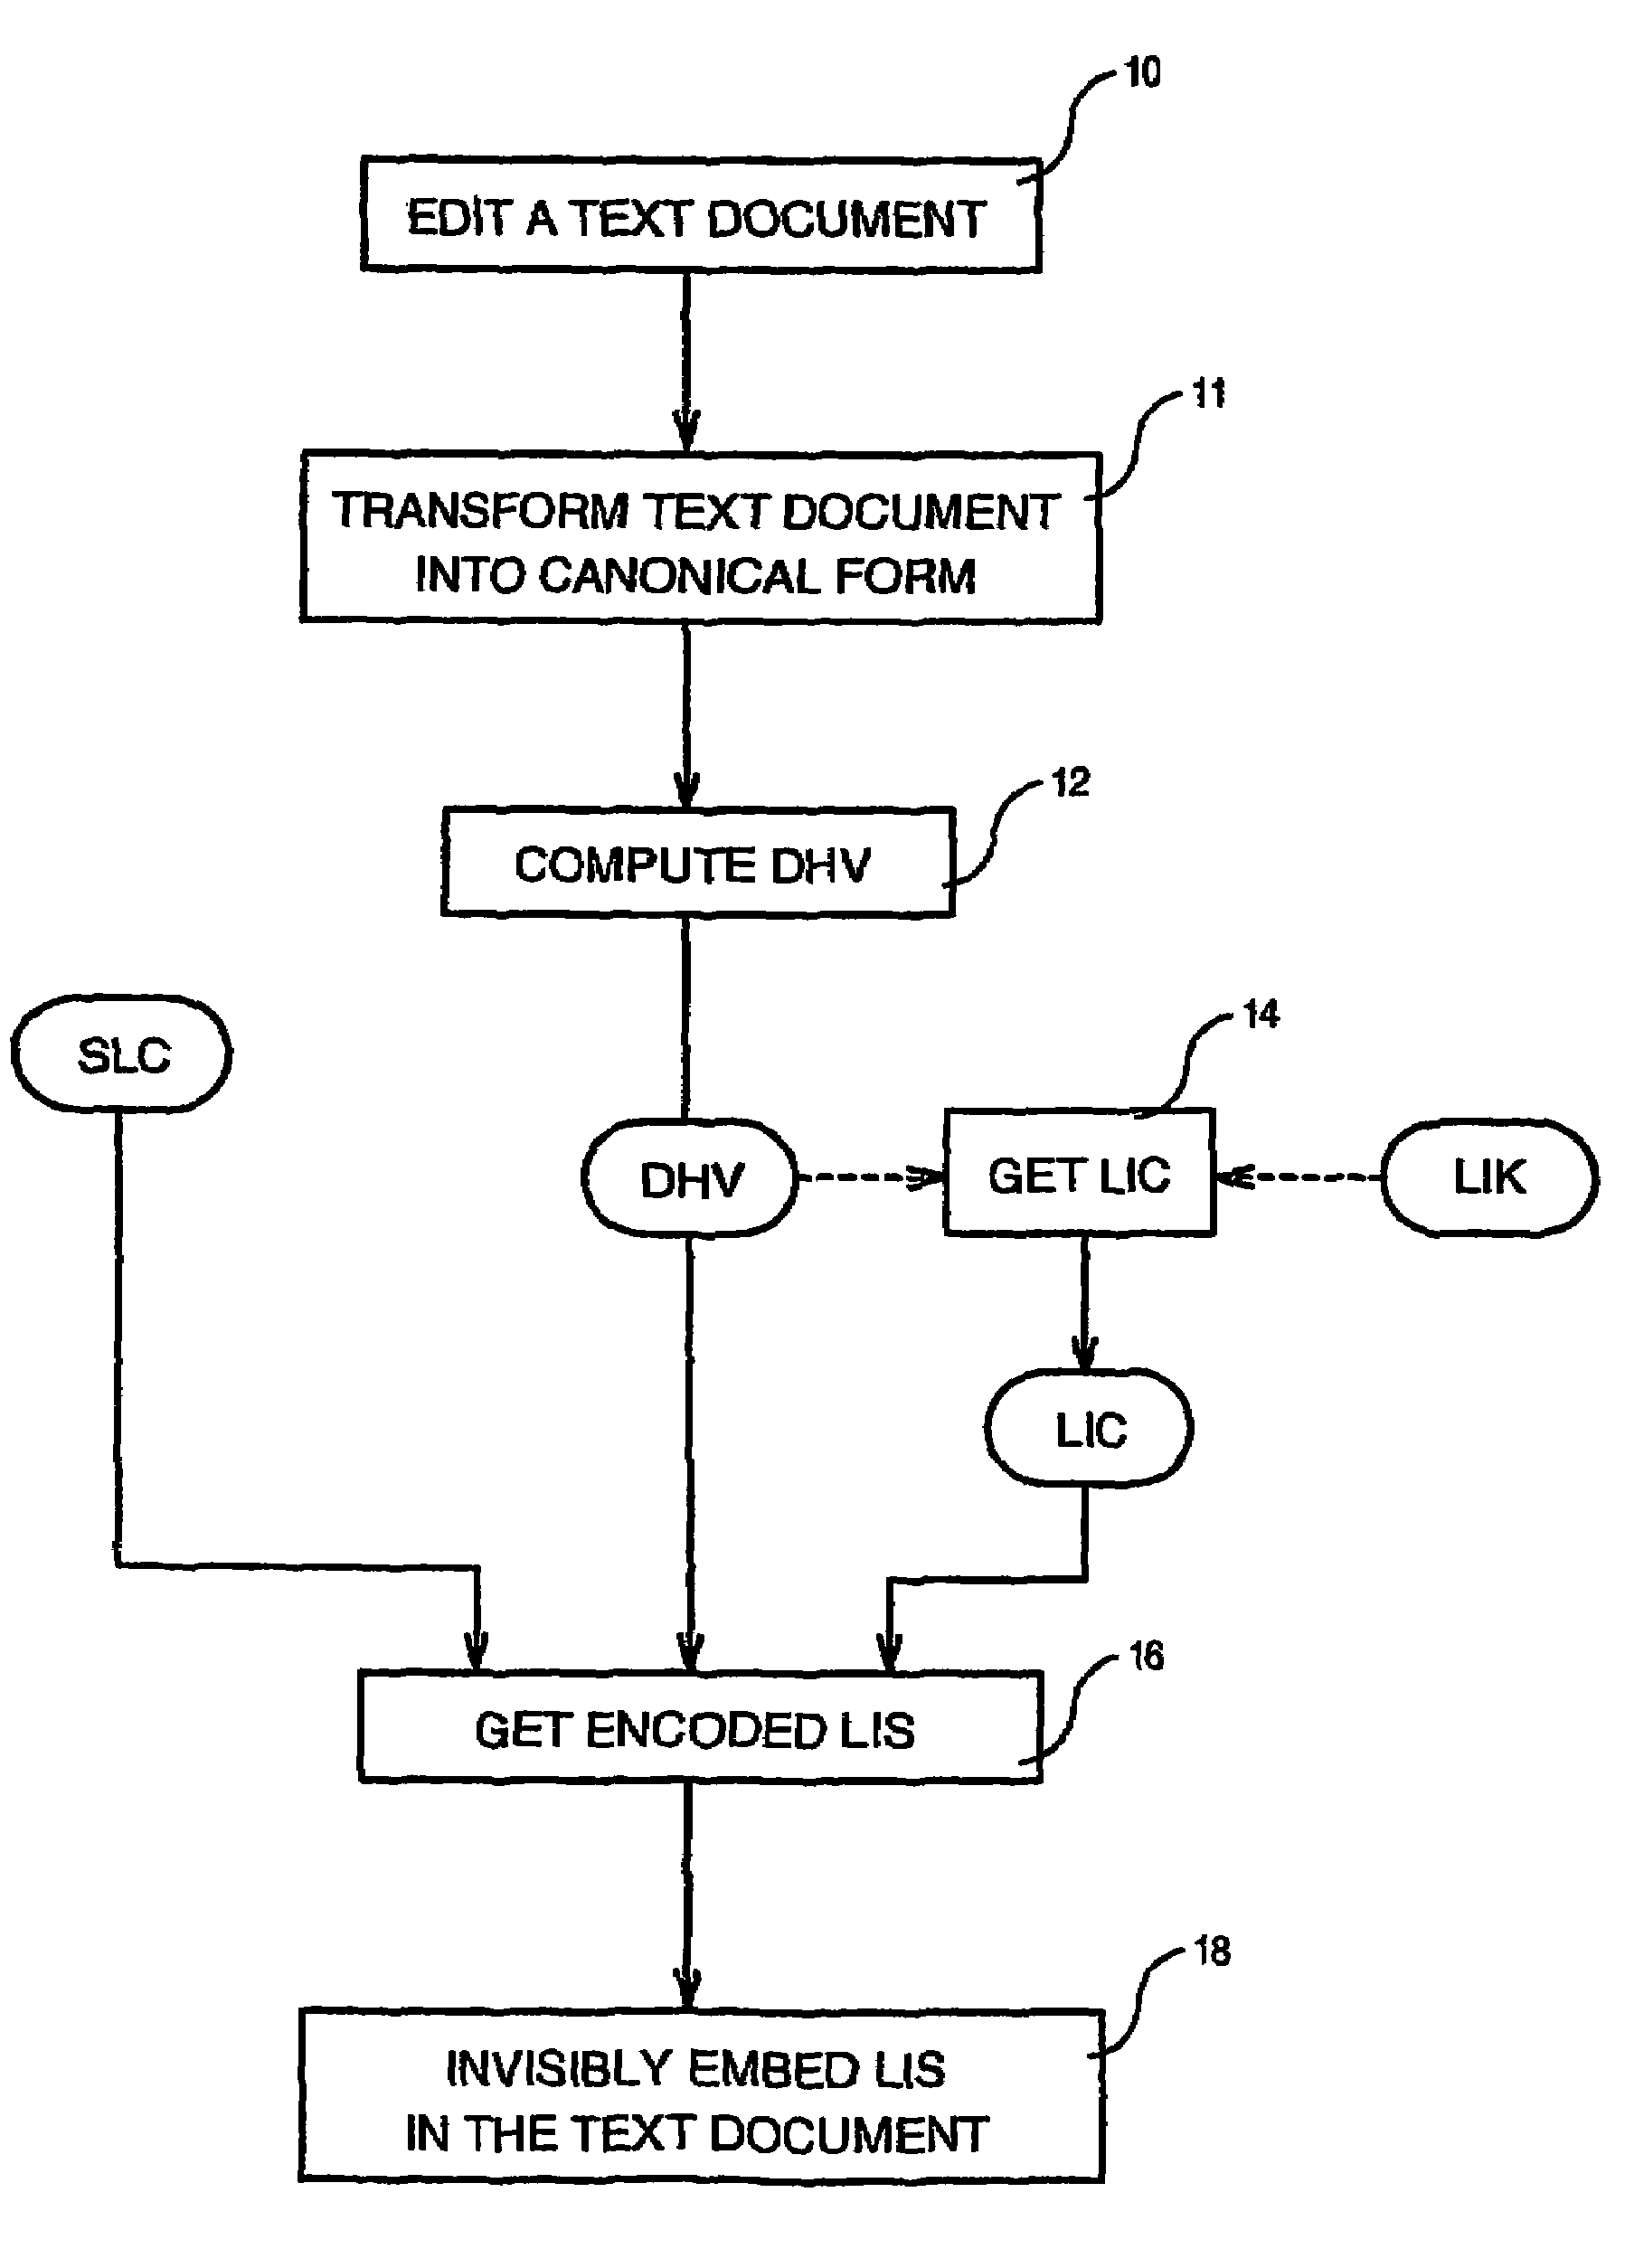 Method of invisibly embedding into a text document the license identification of the generating licensed software